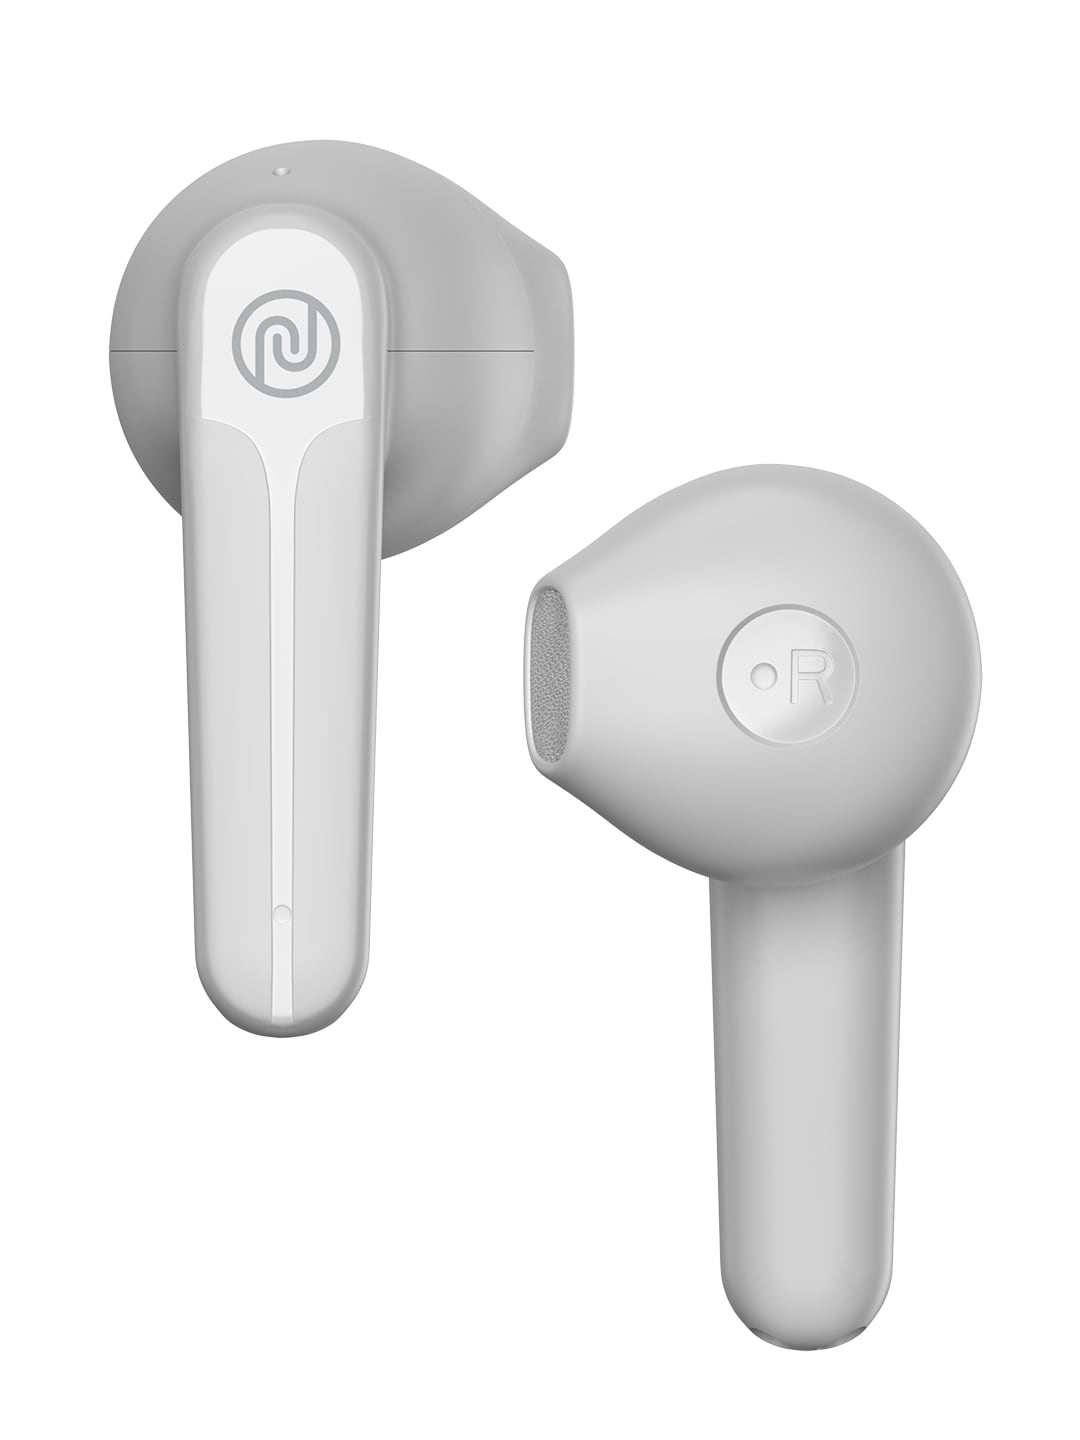 NOISE Buds VS202 Truly Wireless Bluetooth Earbuds - White Price in India